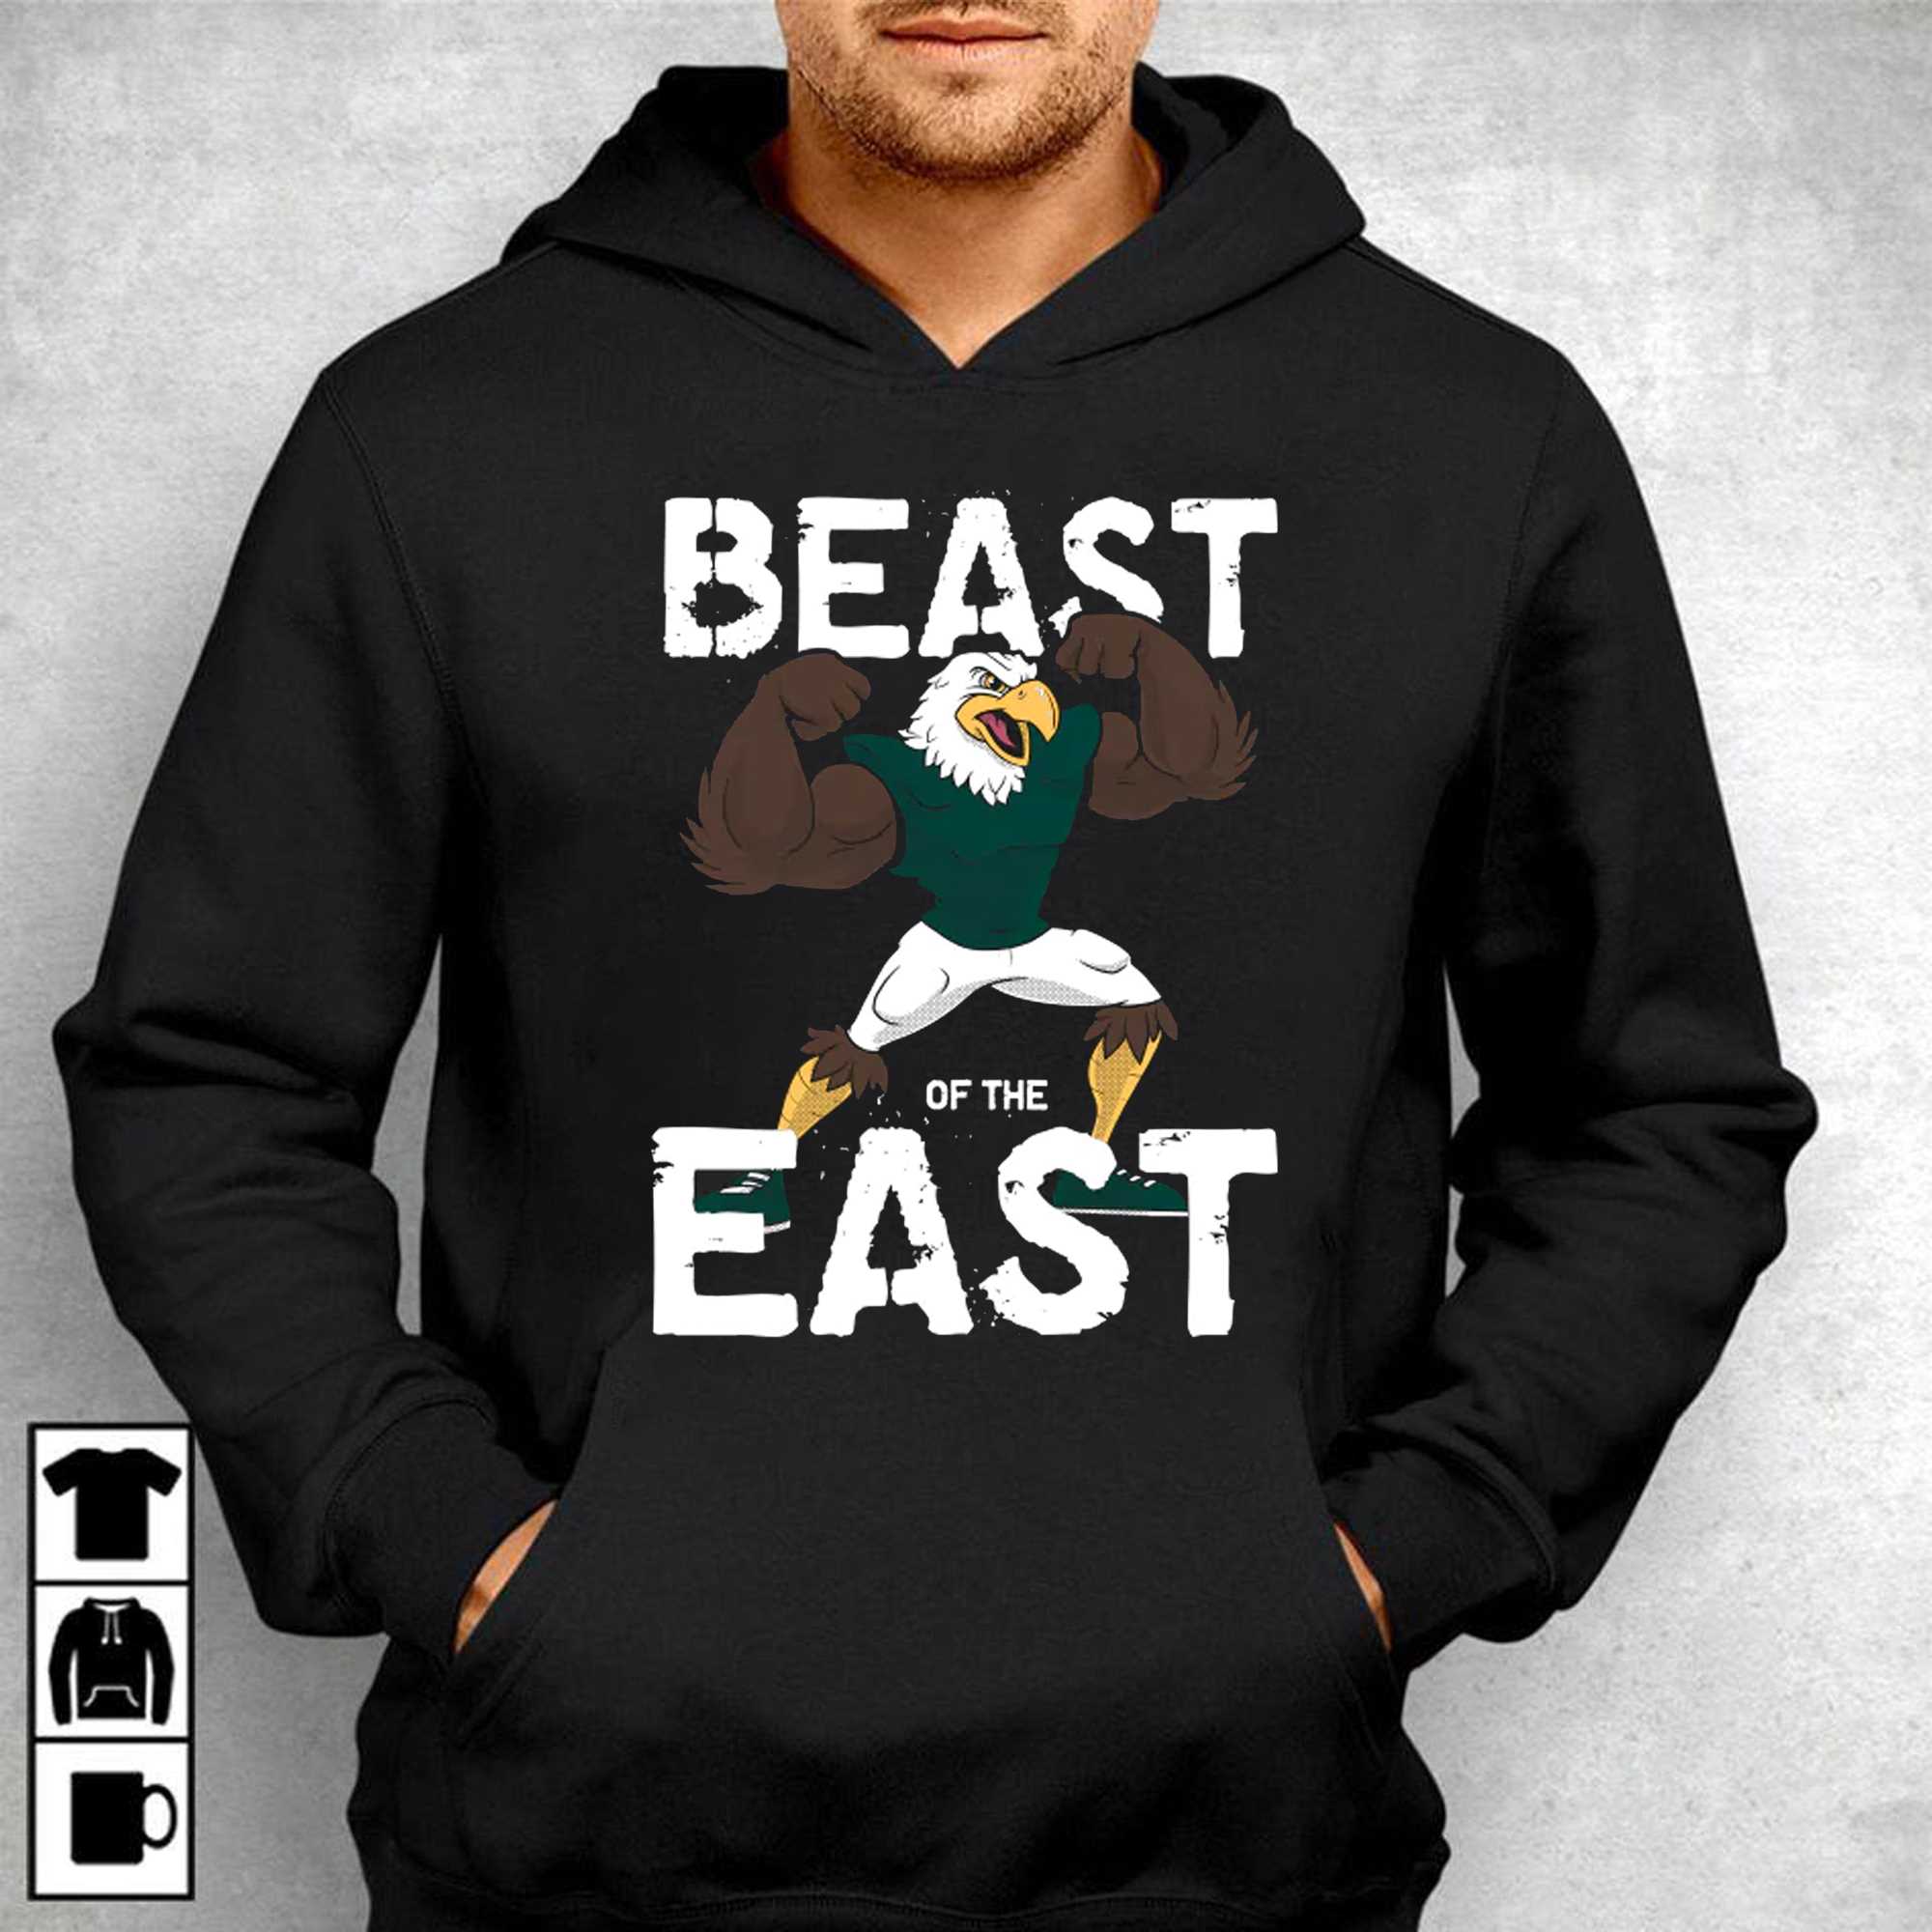 Offcial Beast Of The East T-shirt 